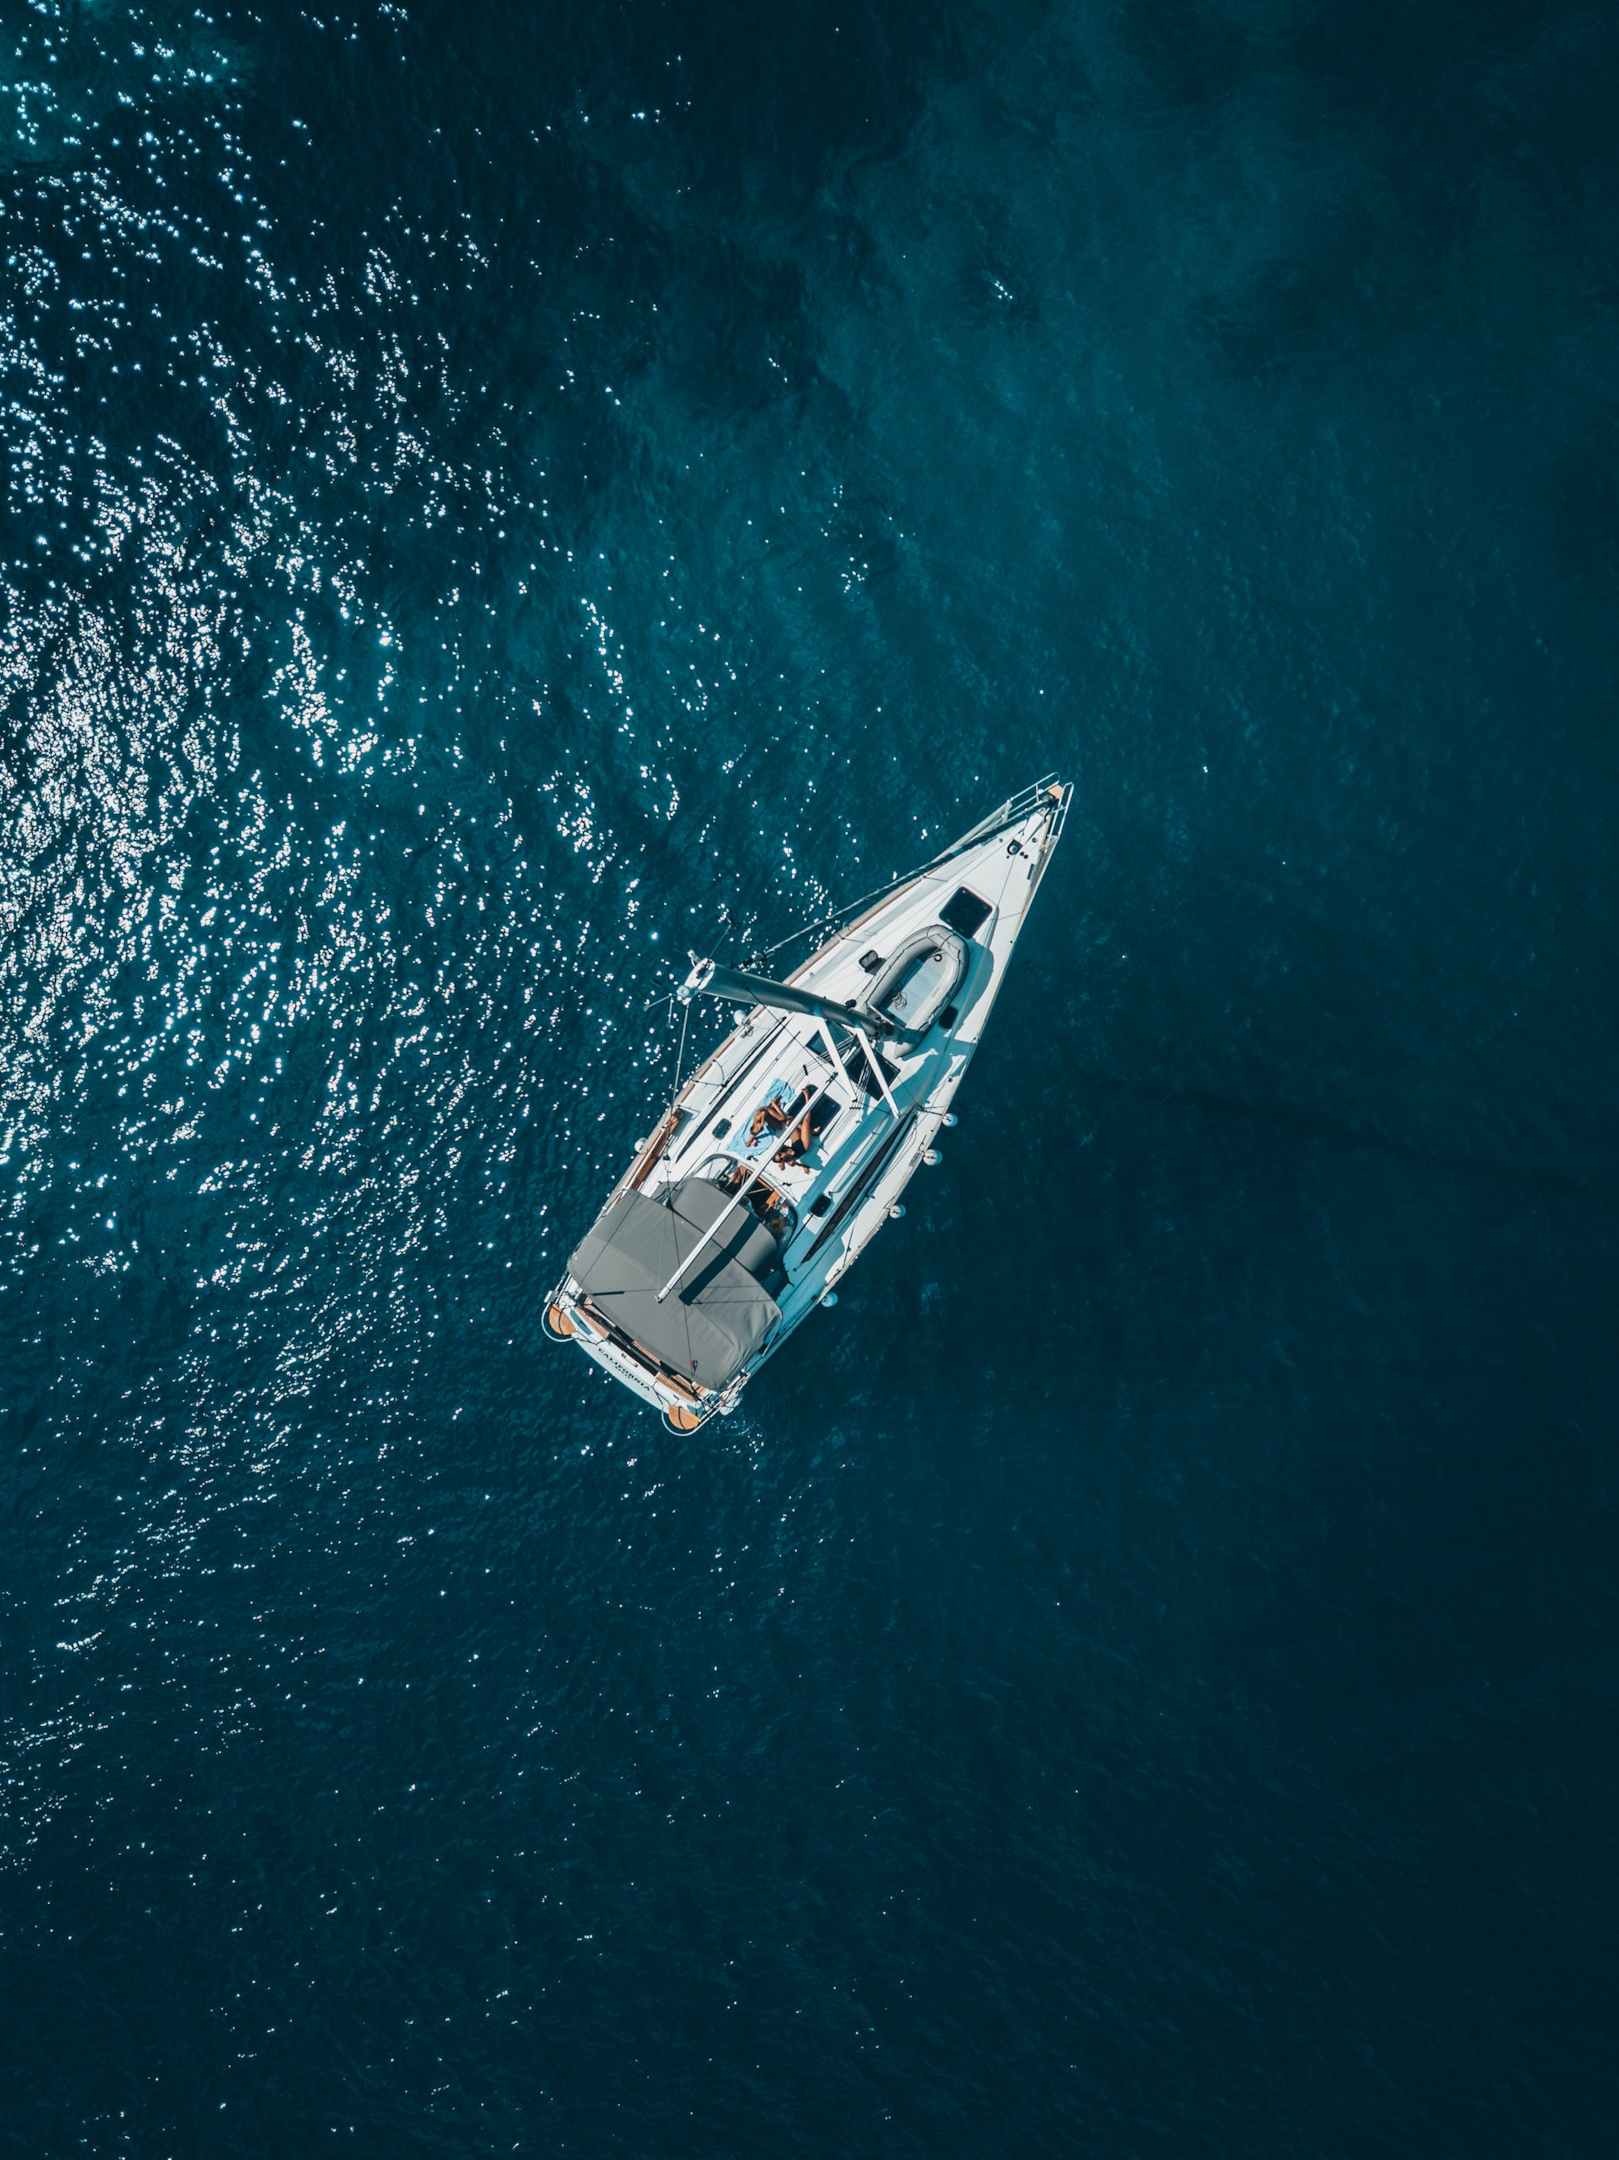 Types of boat insurance policies